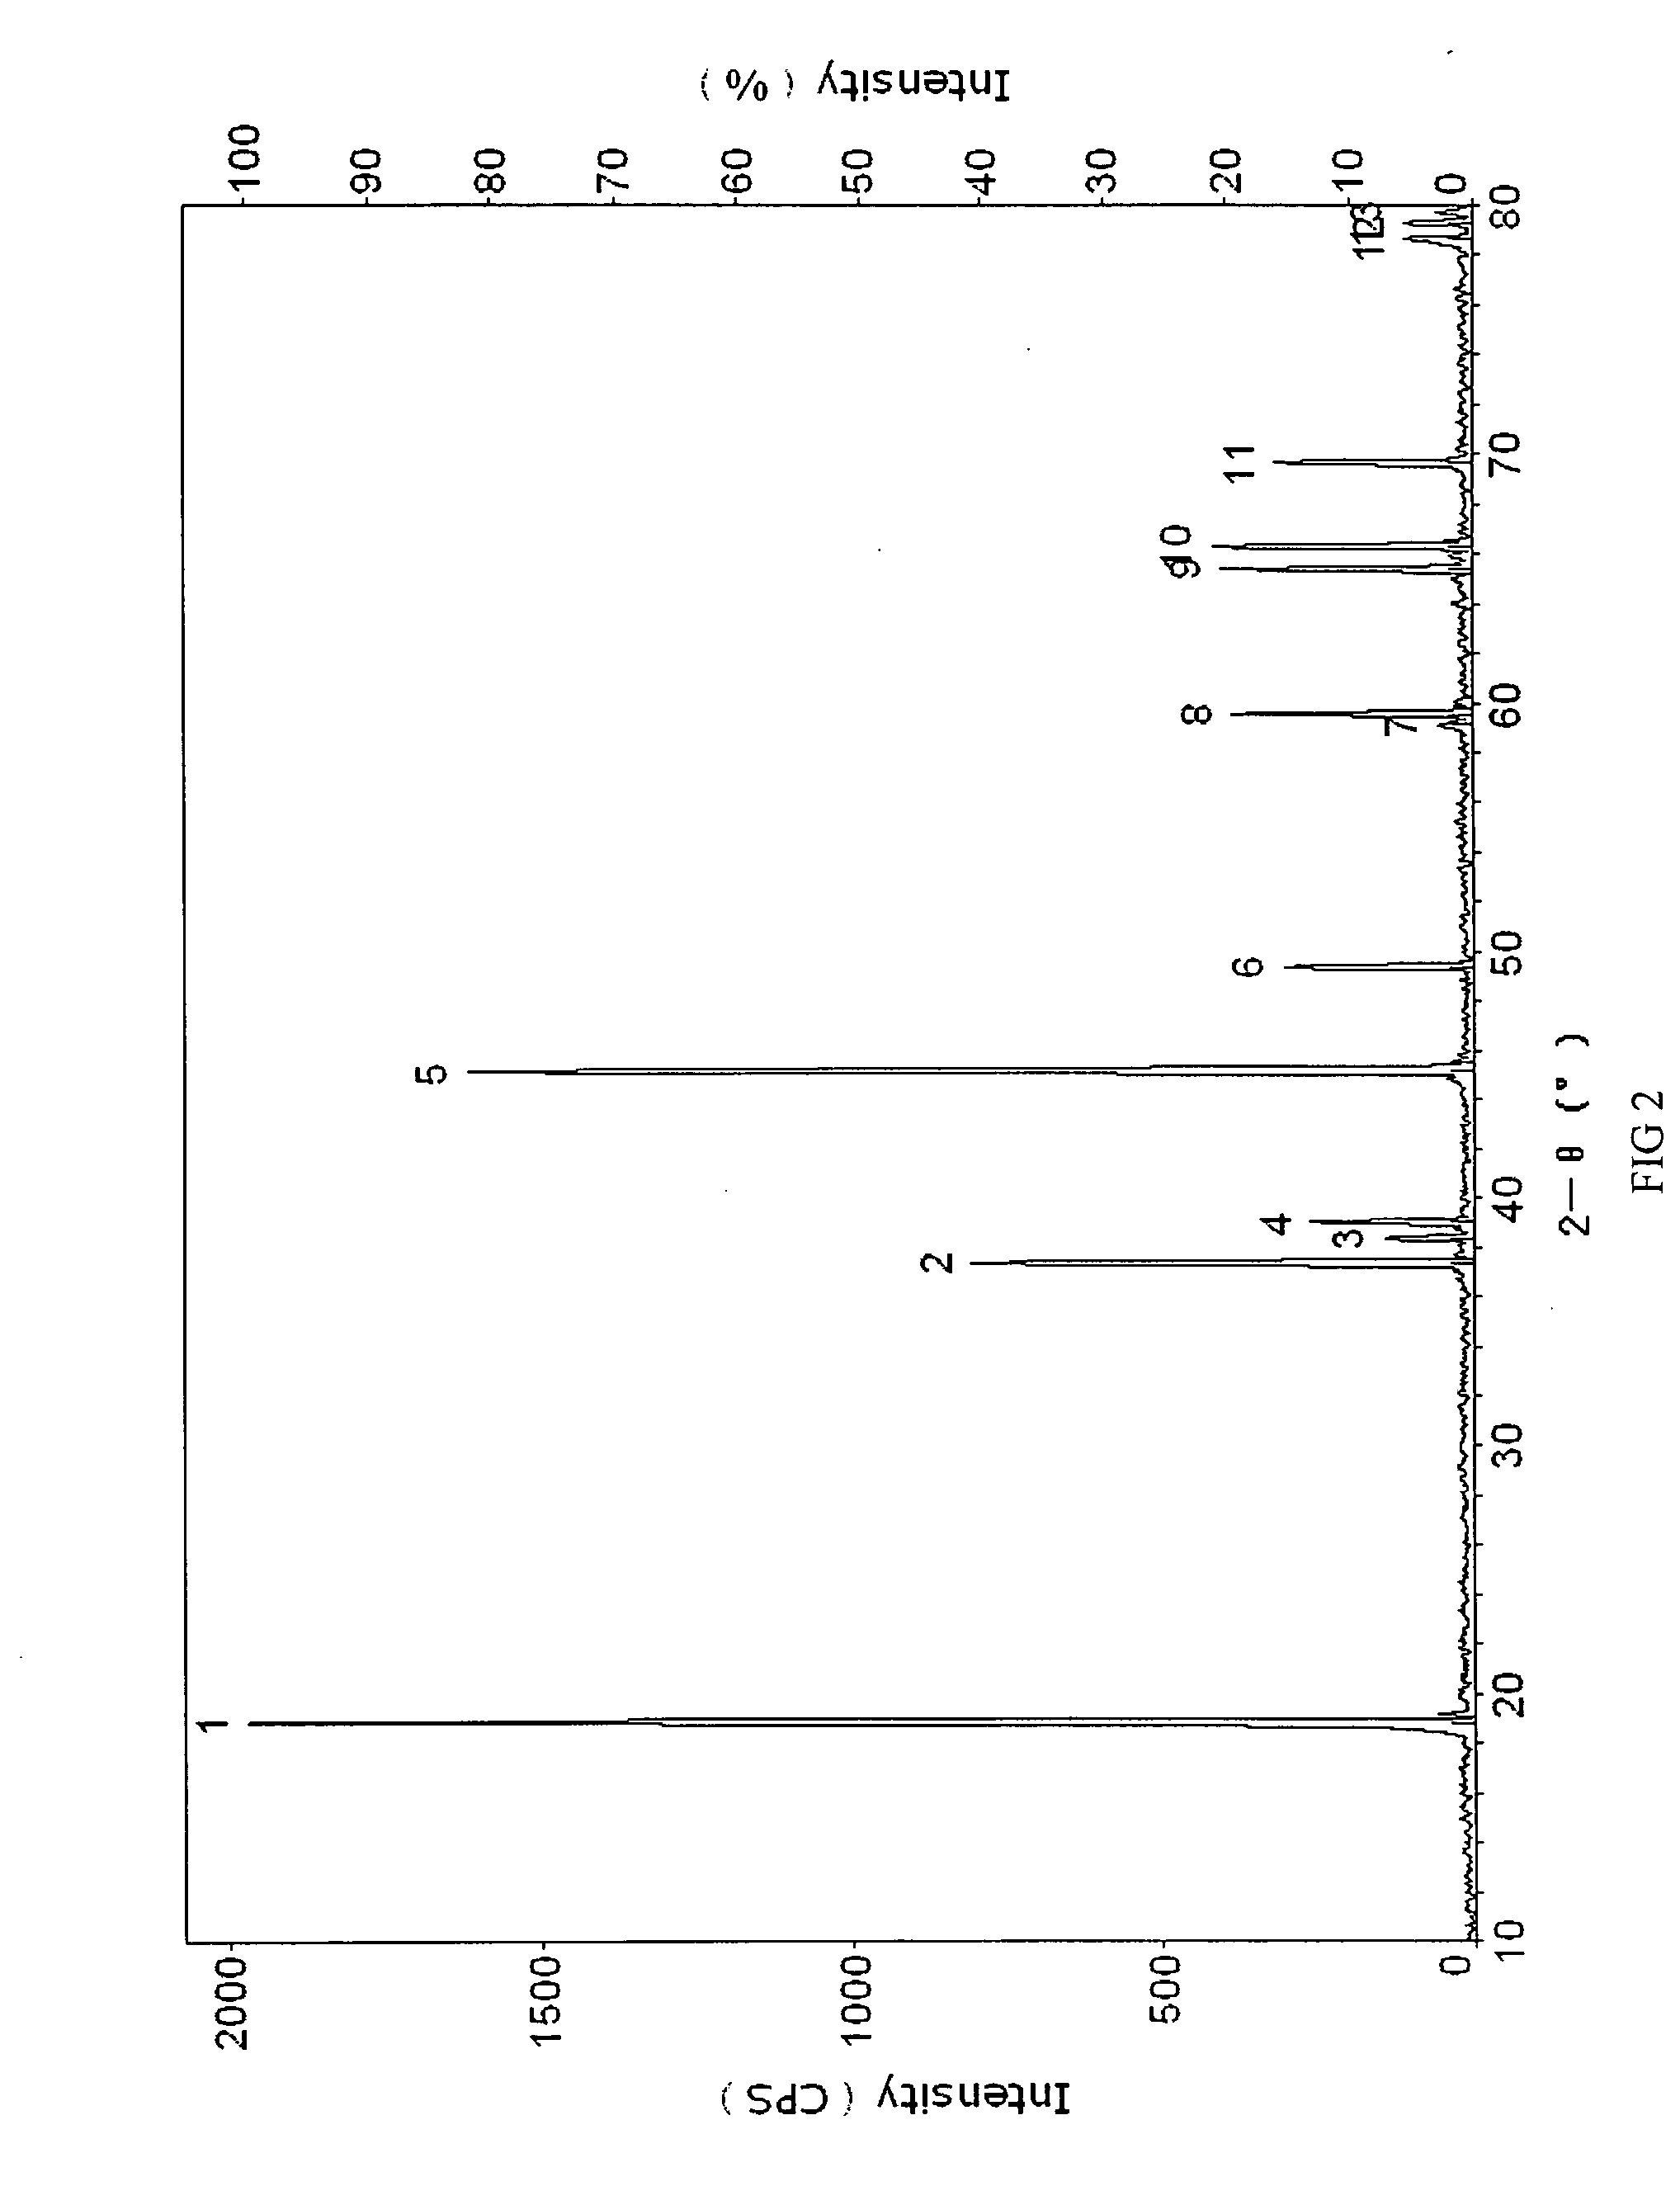 Materials for positive electrodes of lithium ion batteries and their methods of fabrication